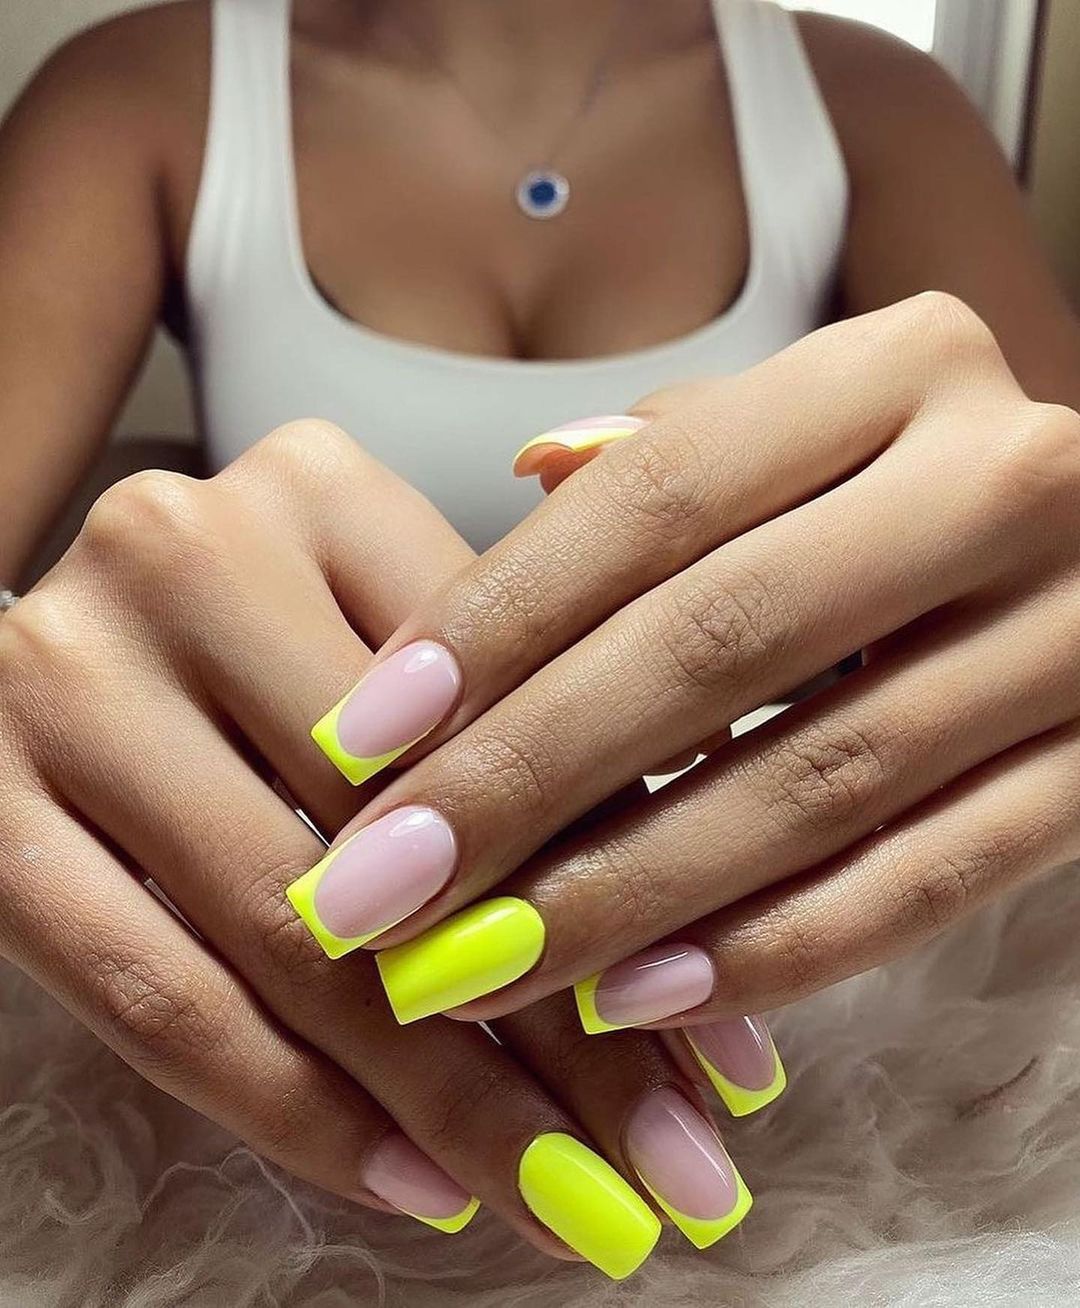 30 Easy Nails & Nail Art Designs To Try In 2022 images 3